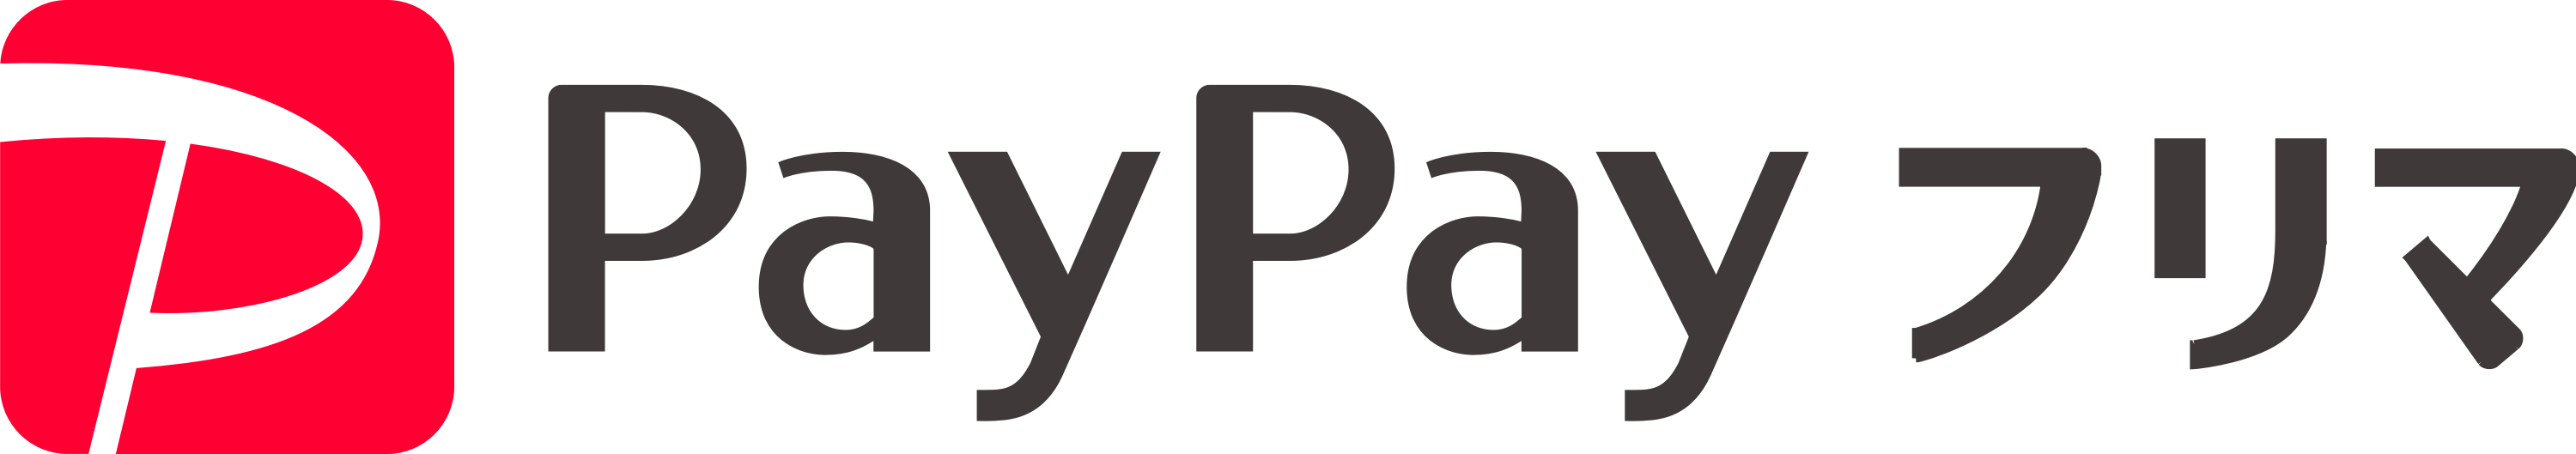 PayPay`s software engineer jobs tokyo